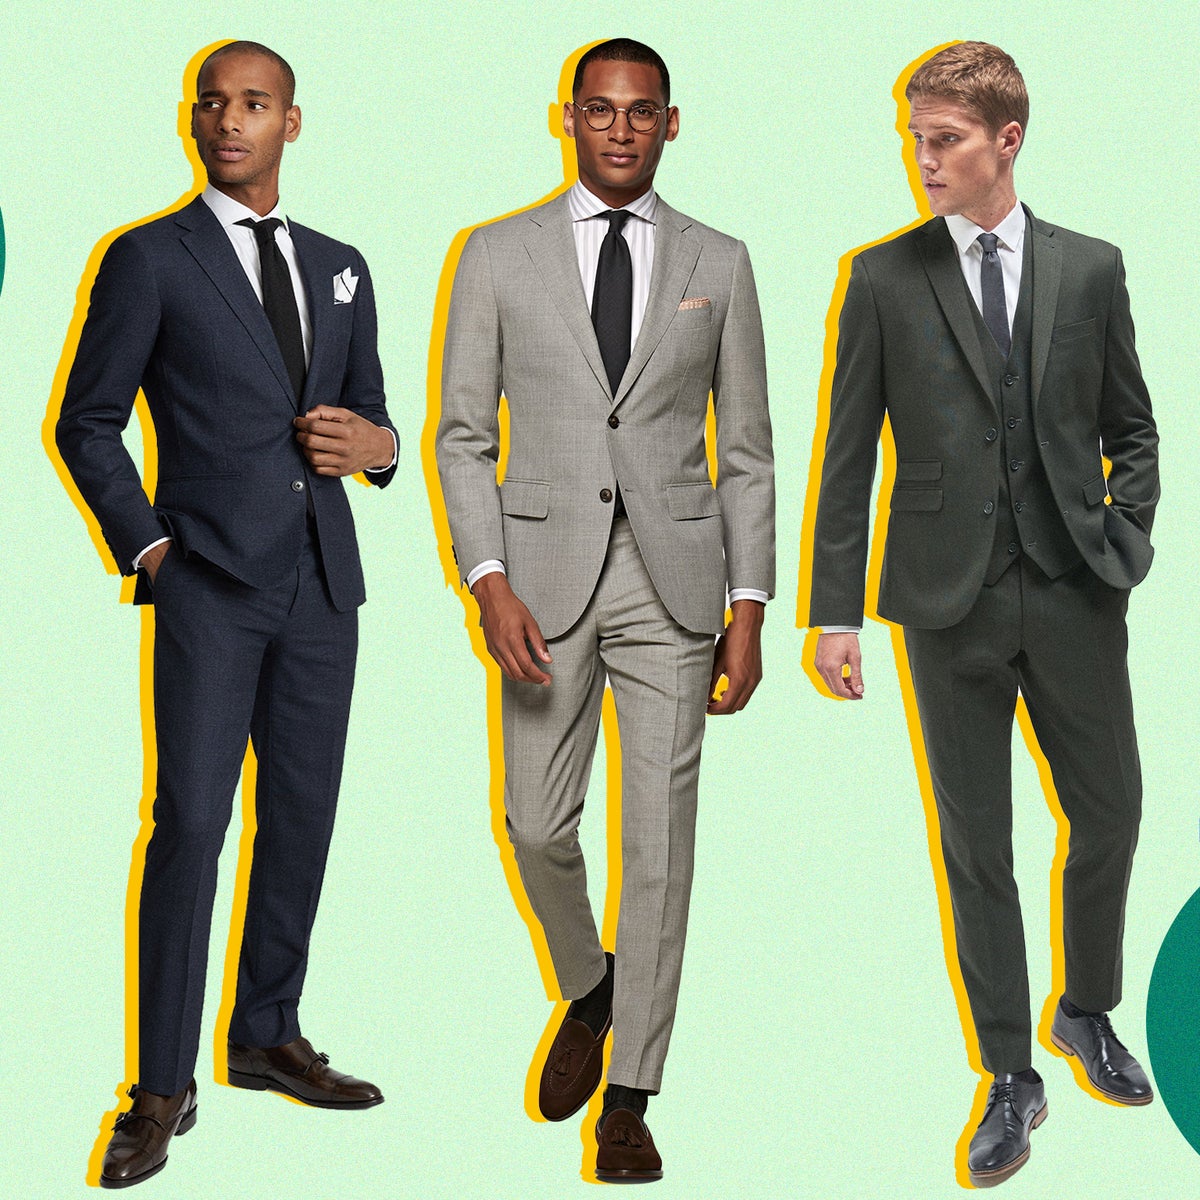 Best suits for men 2021: 8 styles for every budget and occasion